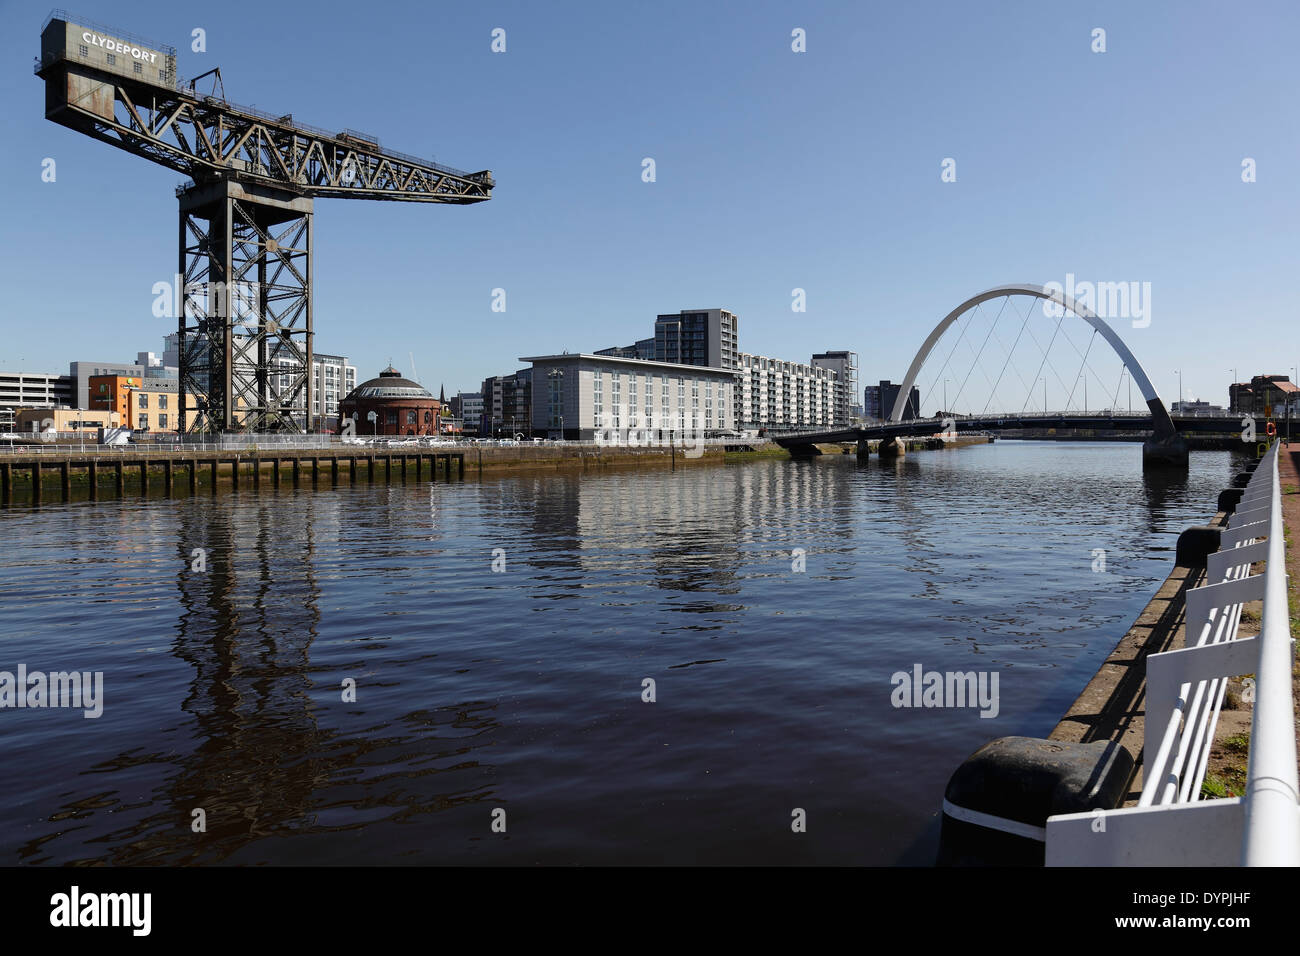 Looking East along the River Clyde towards the Finnieston Crane and Clyde Arc Bridge, Glasgow, Scotland UK Stock Photo